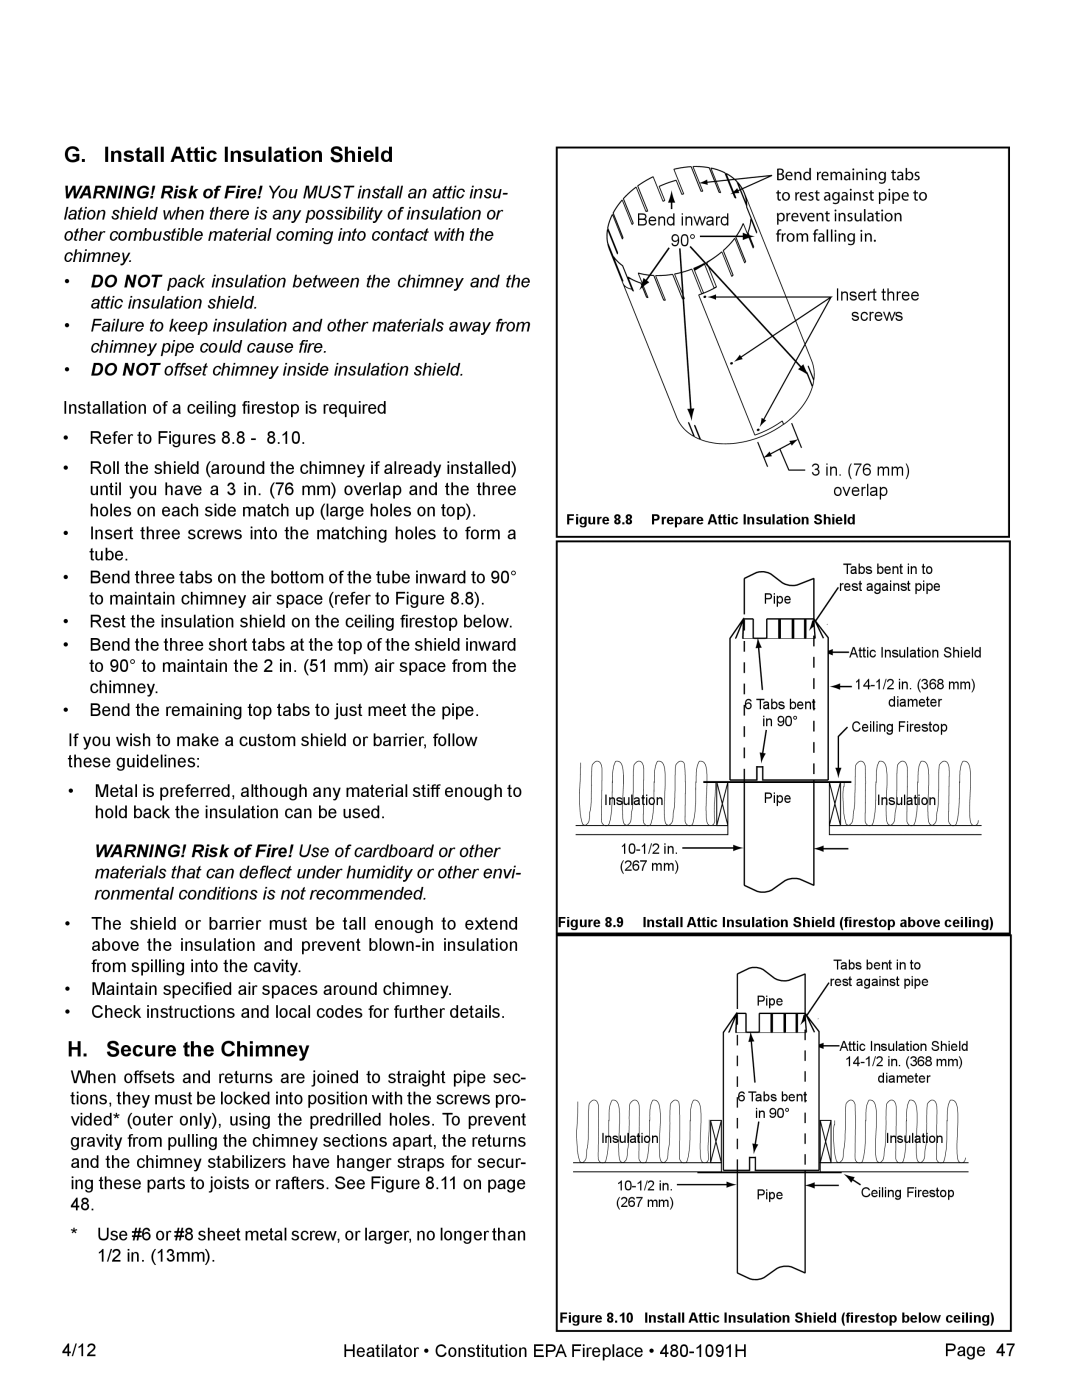 Heatiator C40 owner manual G. Install Attic Insulation Shield, H. Secure the Chimney 